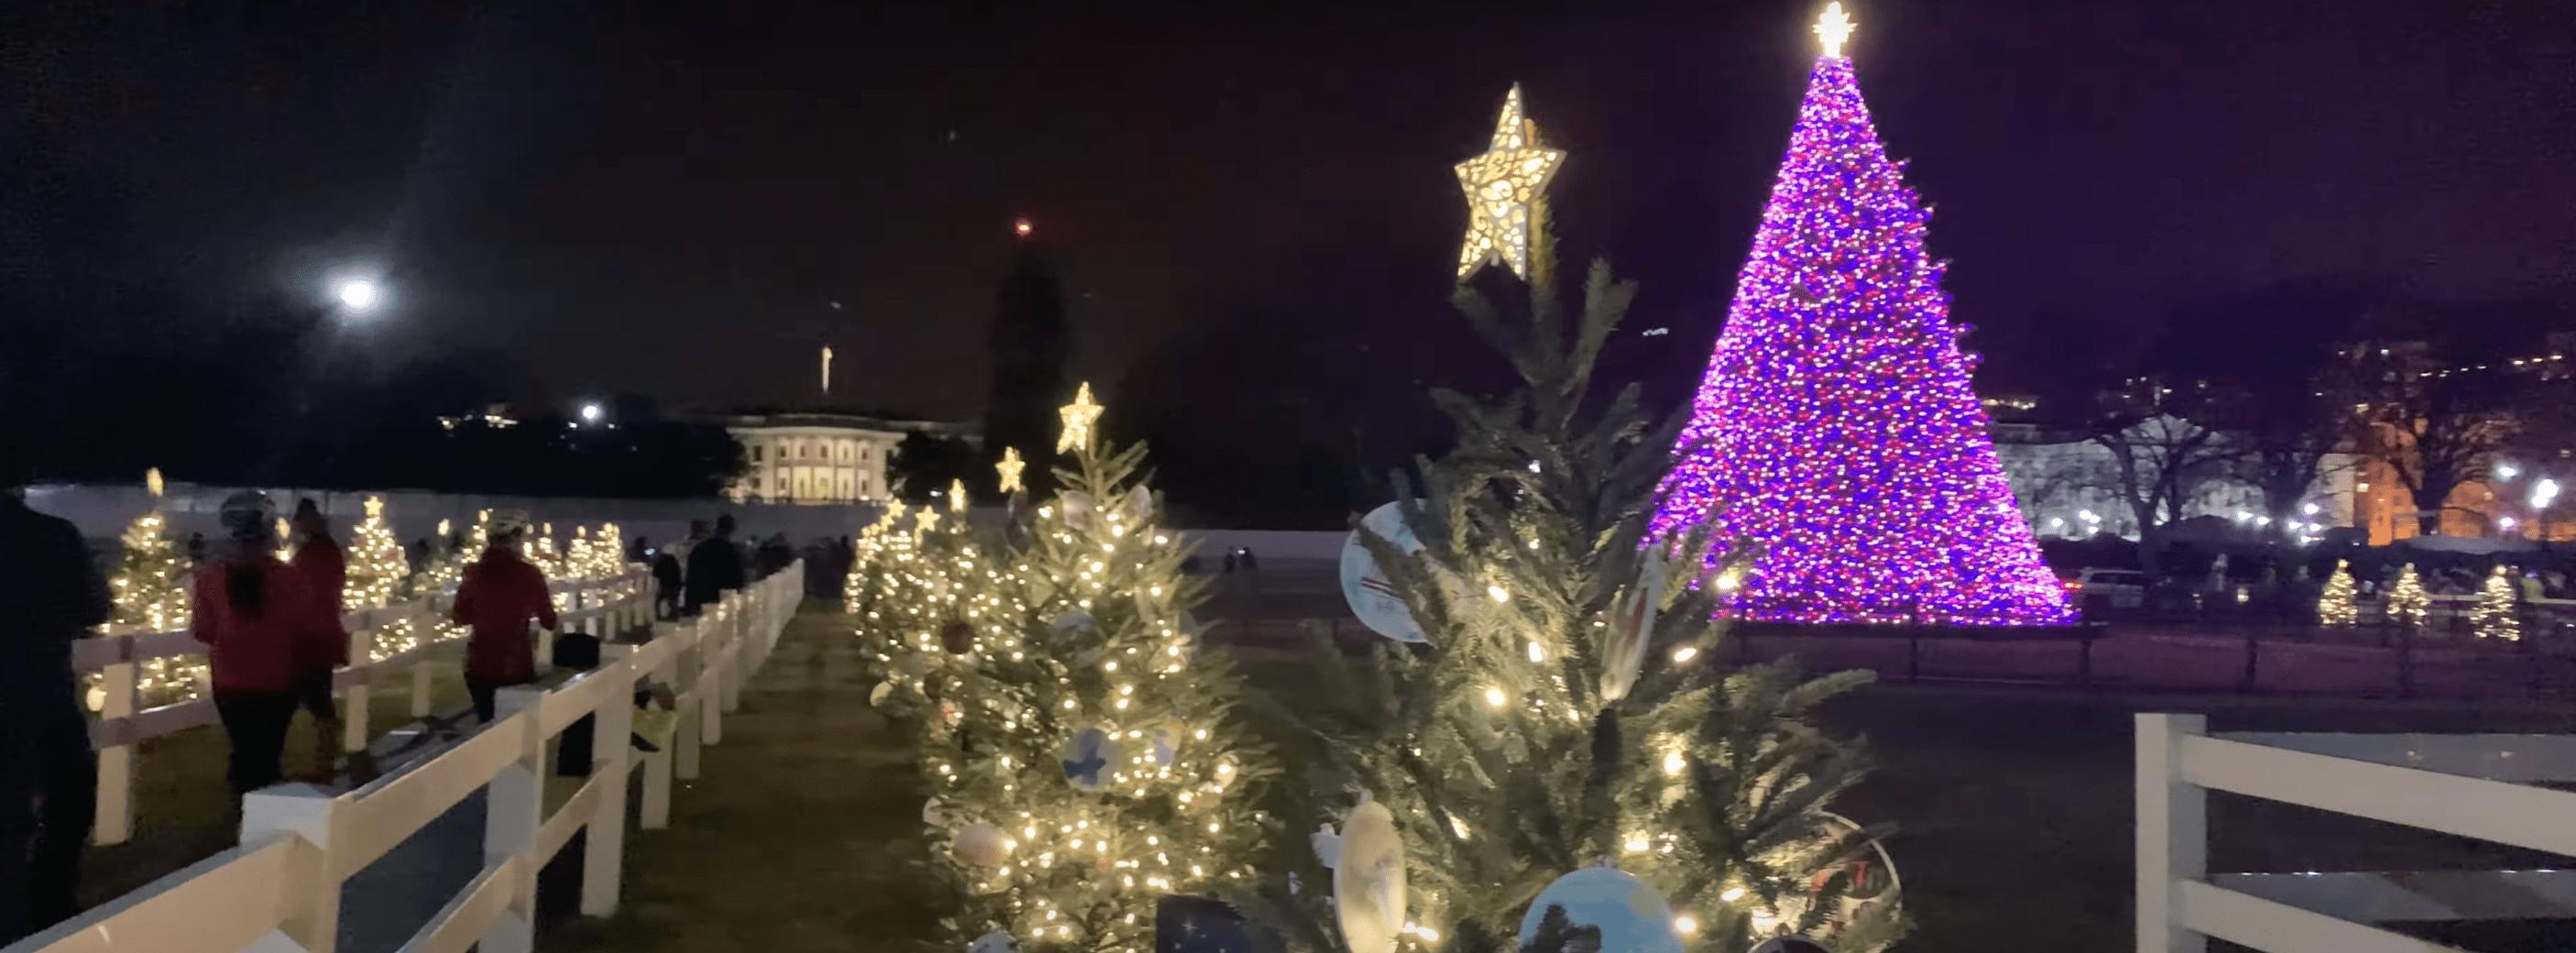 Visit the National Christmas Tree and Lighting Ceremony